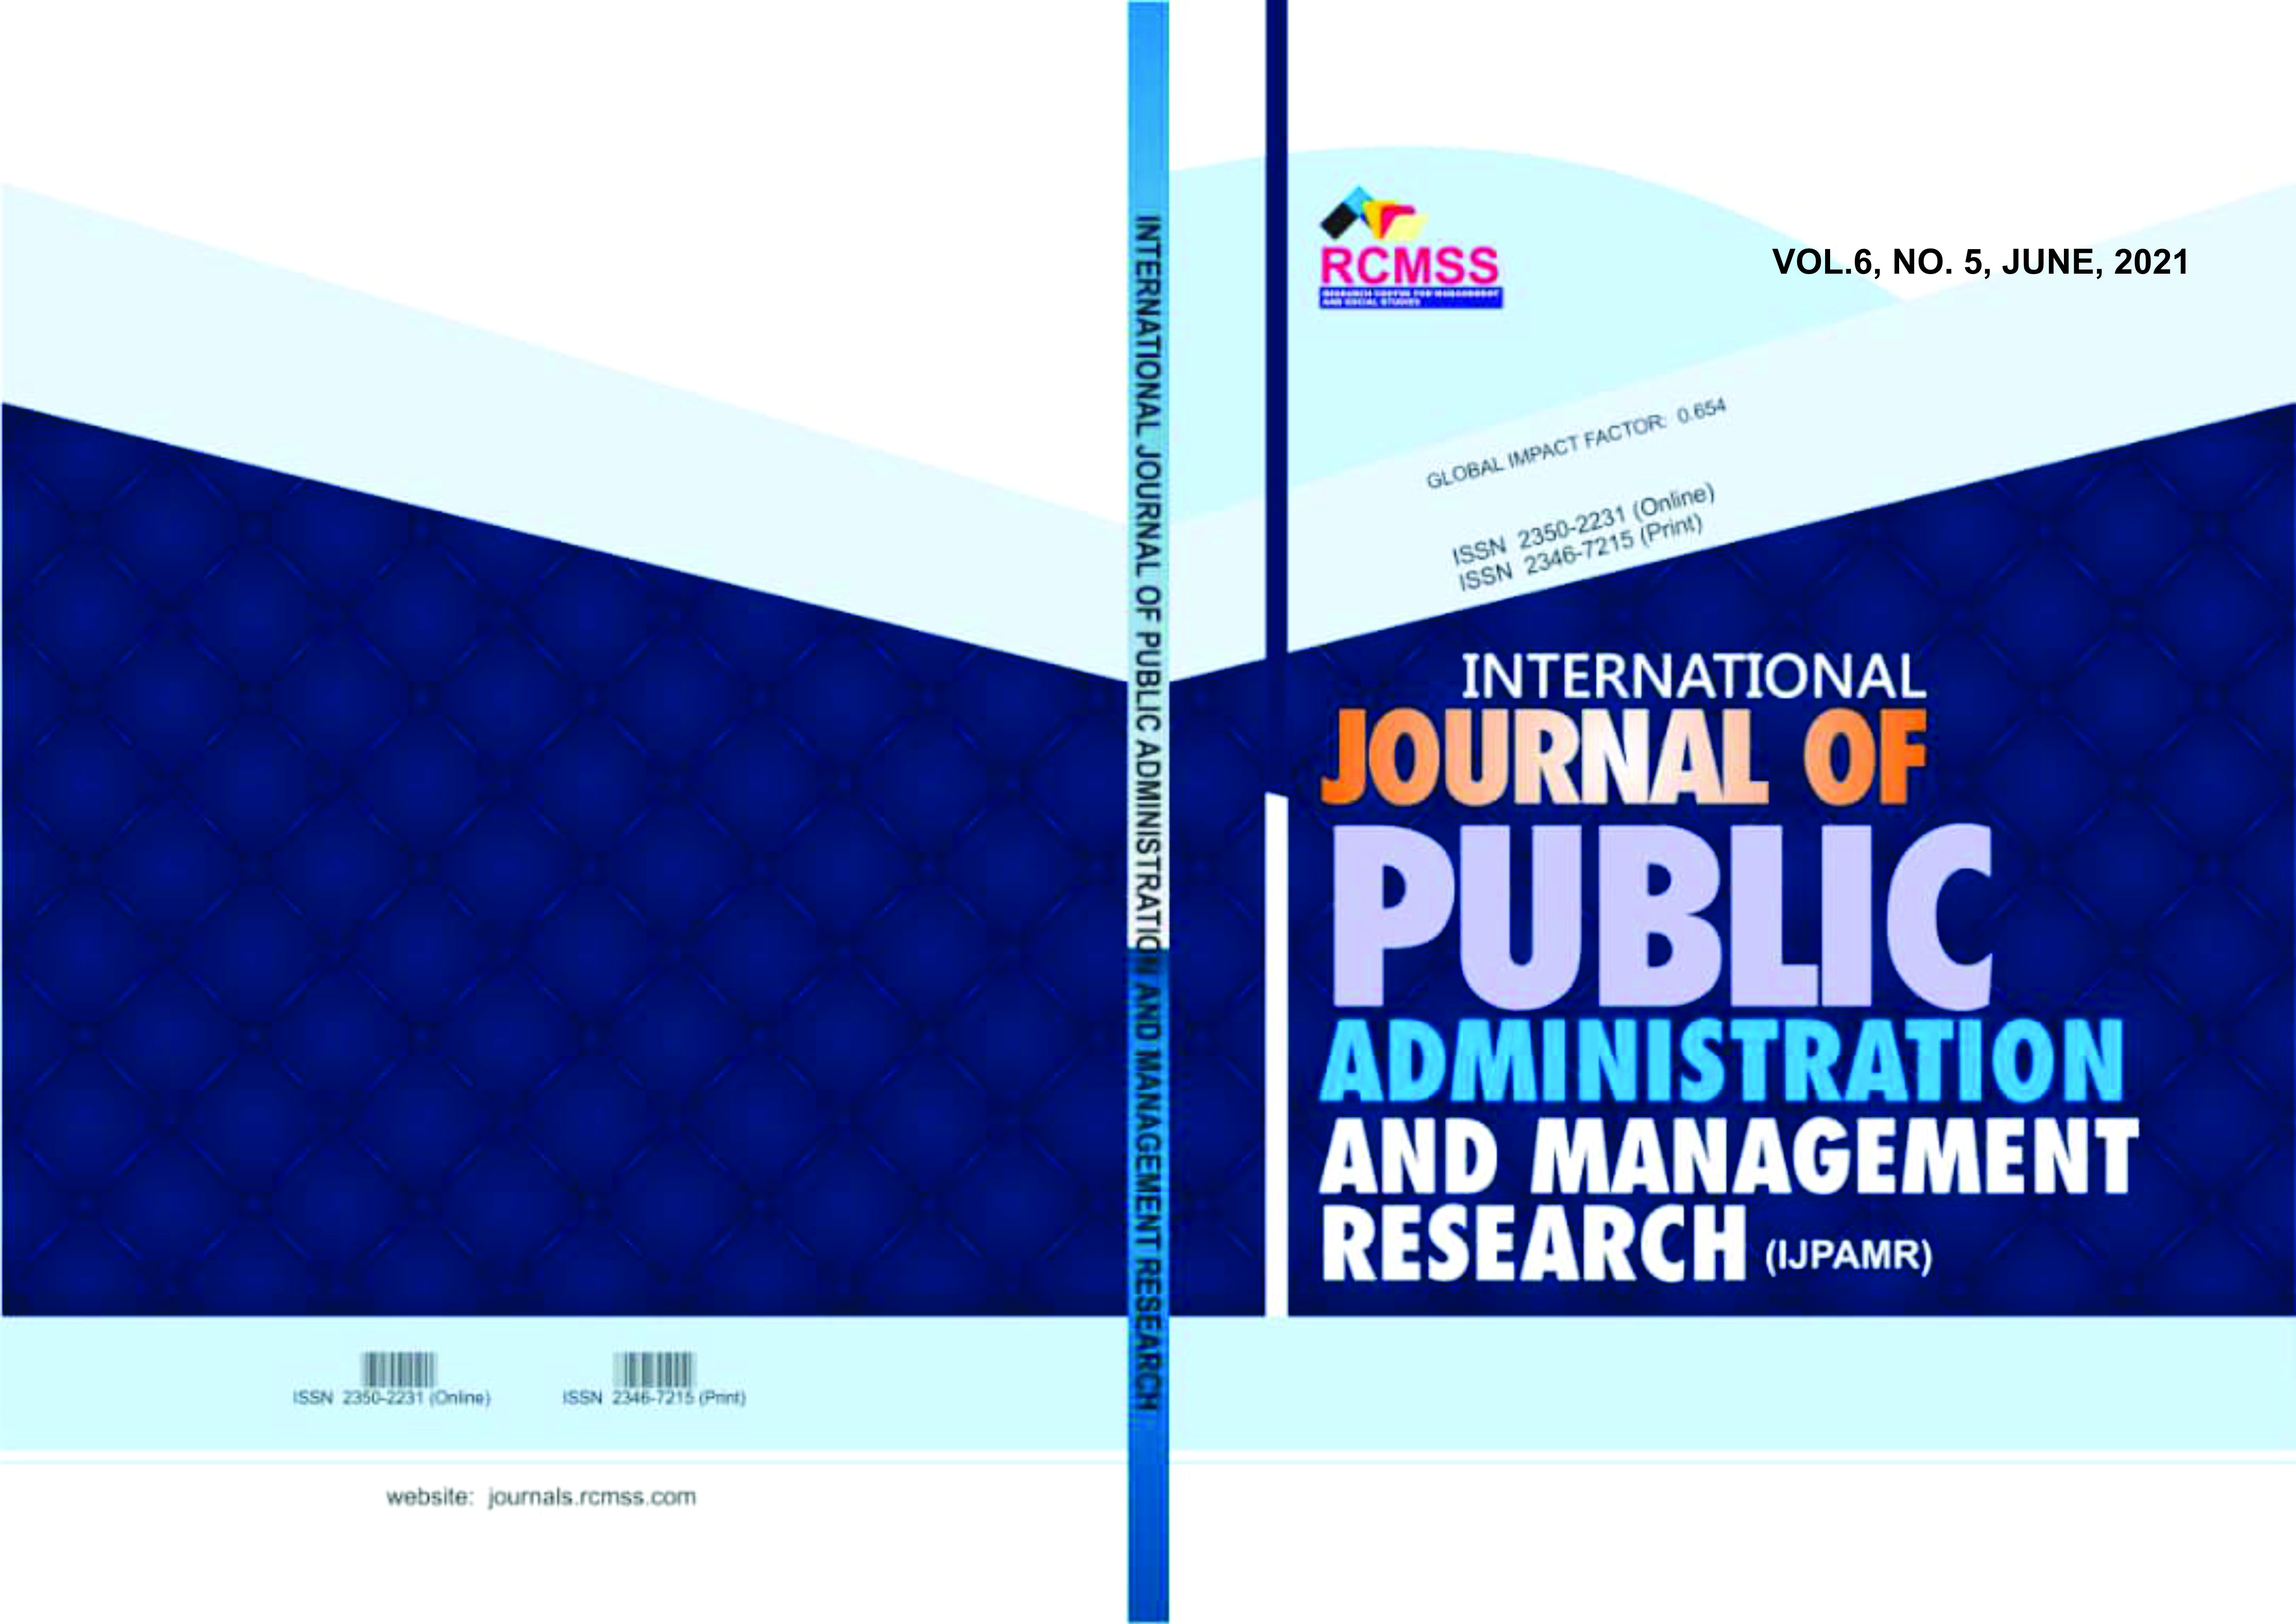 					View Vol. 2 No. 3 (2014): International Journal of Public Administration and Management Research (IJPAMR)
				